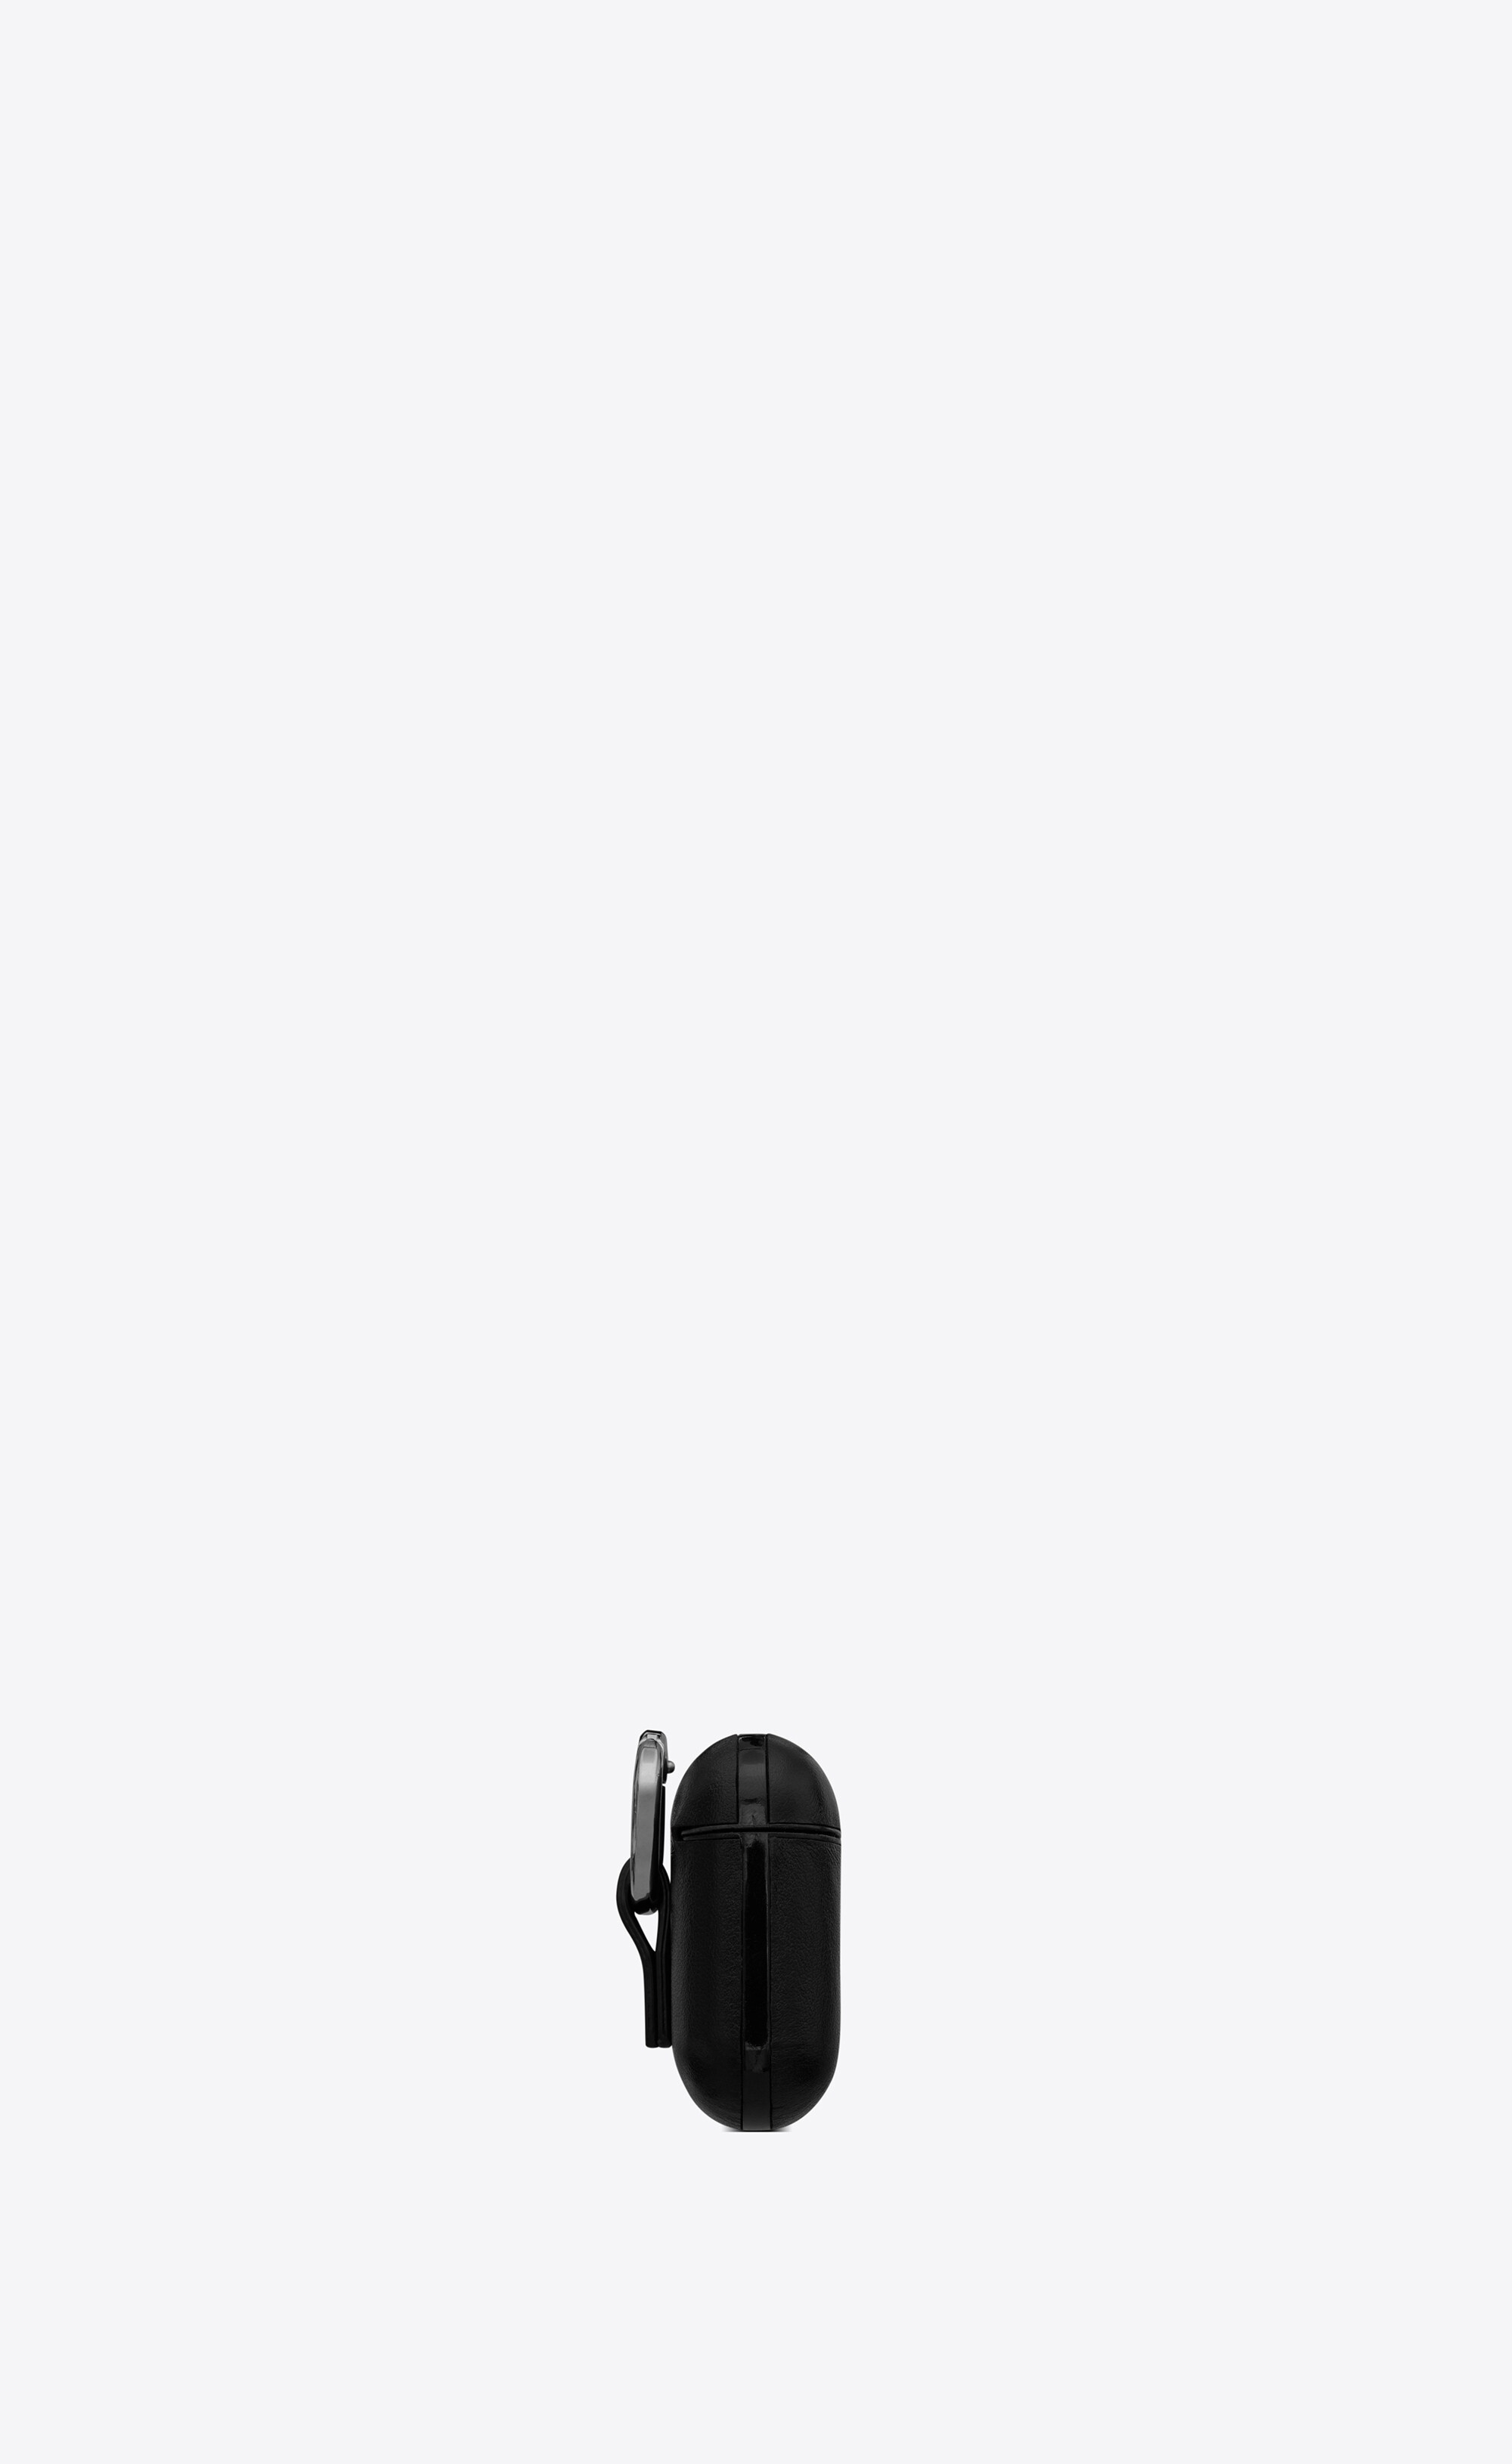 saint laurent airpods case in smooth leather - 3